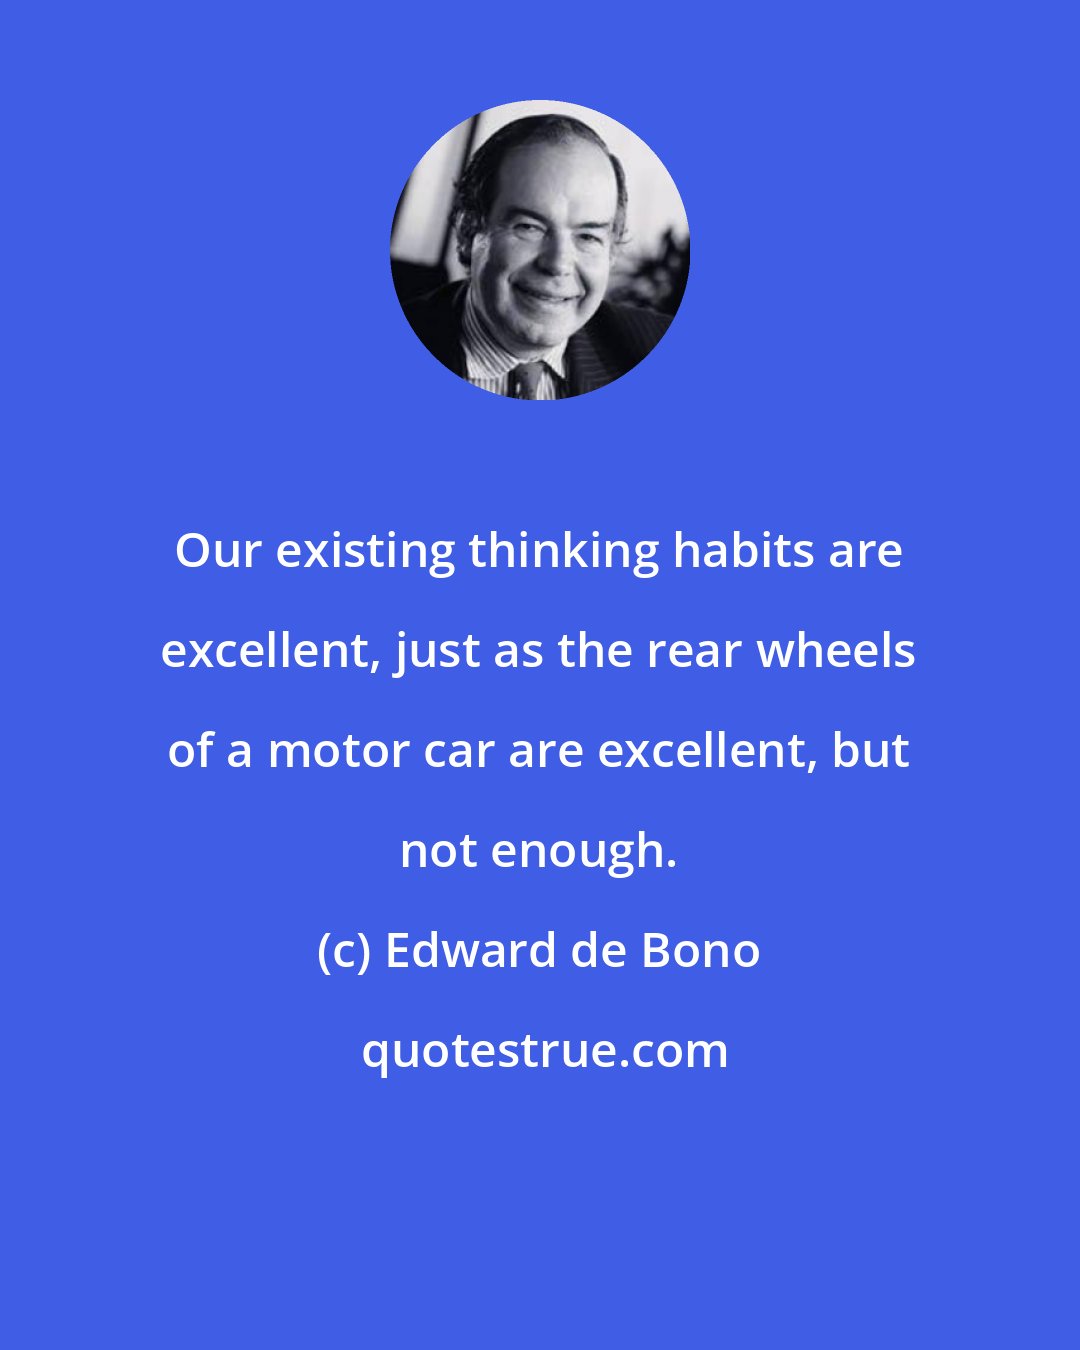 Edward de Bono: Our existing thinking habits are excellent, just as the rear wheels of a motor car are excellent, but not enough.